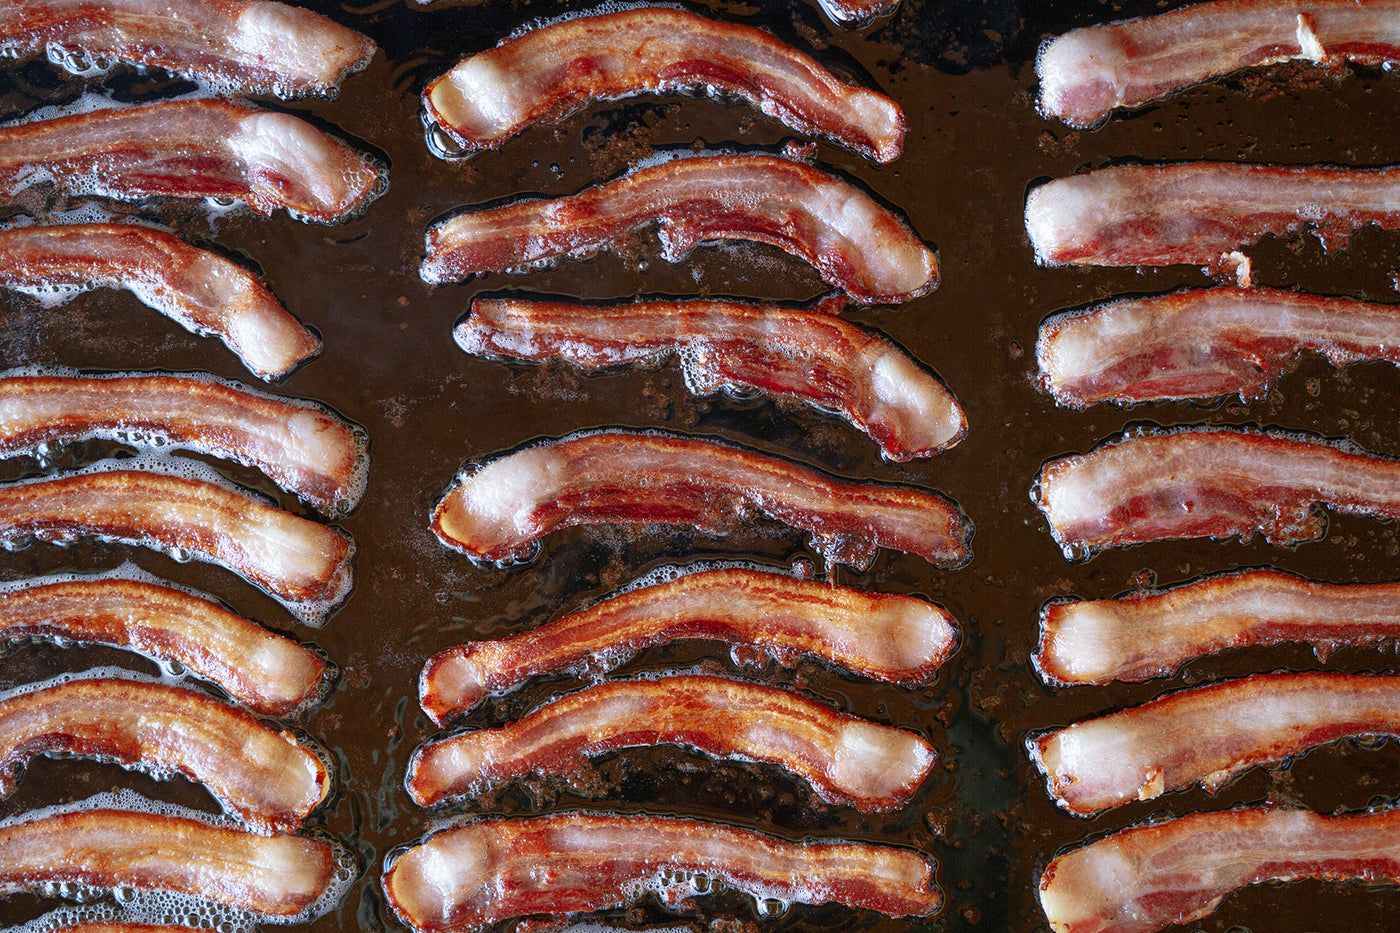 Several slices of uncured bacon are frying on a black cook top.